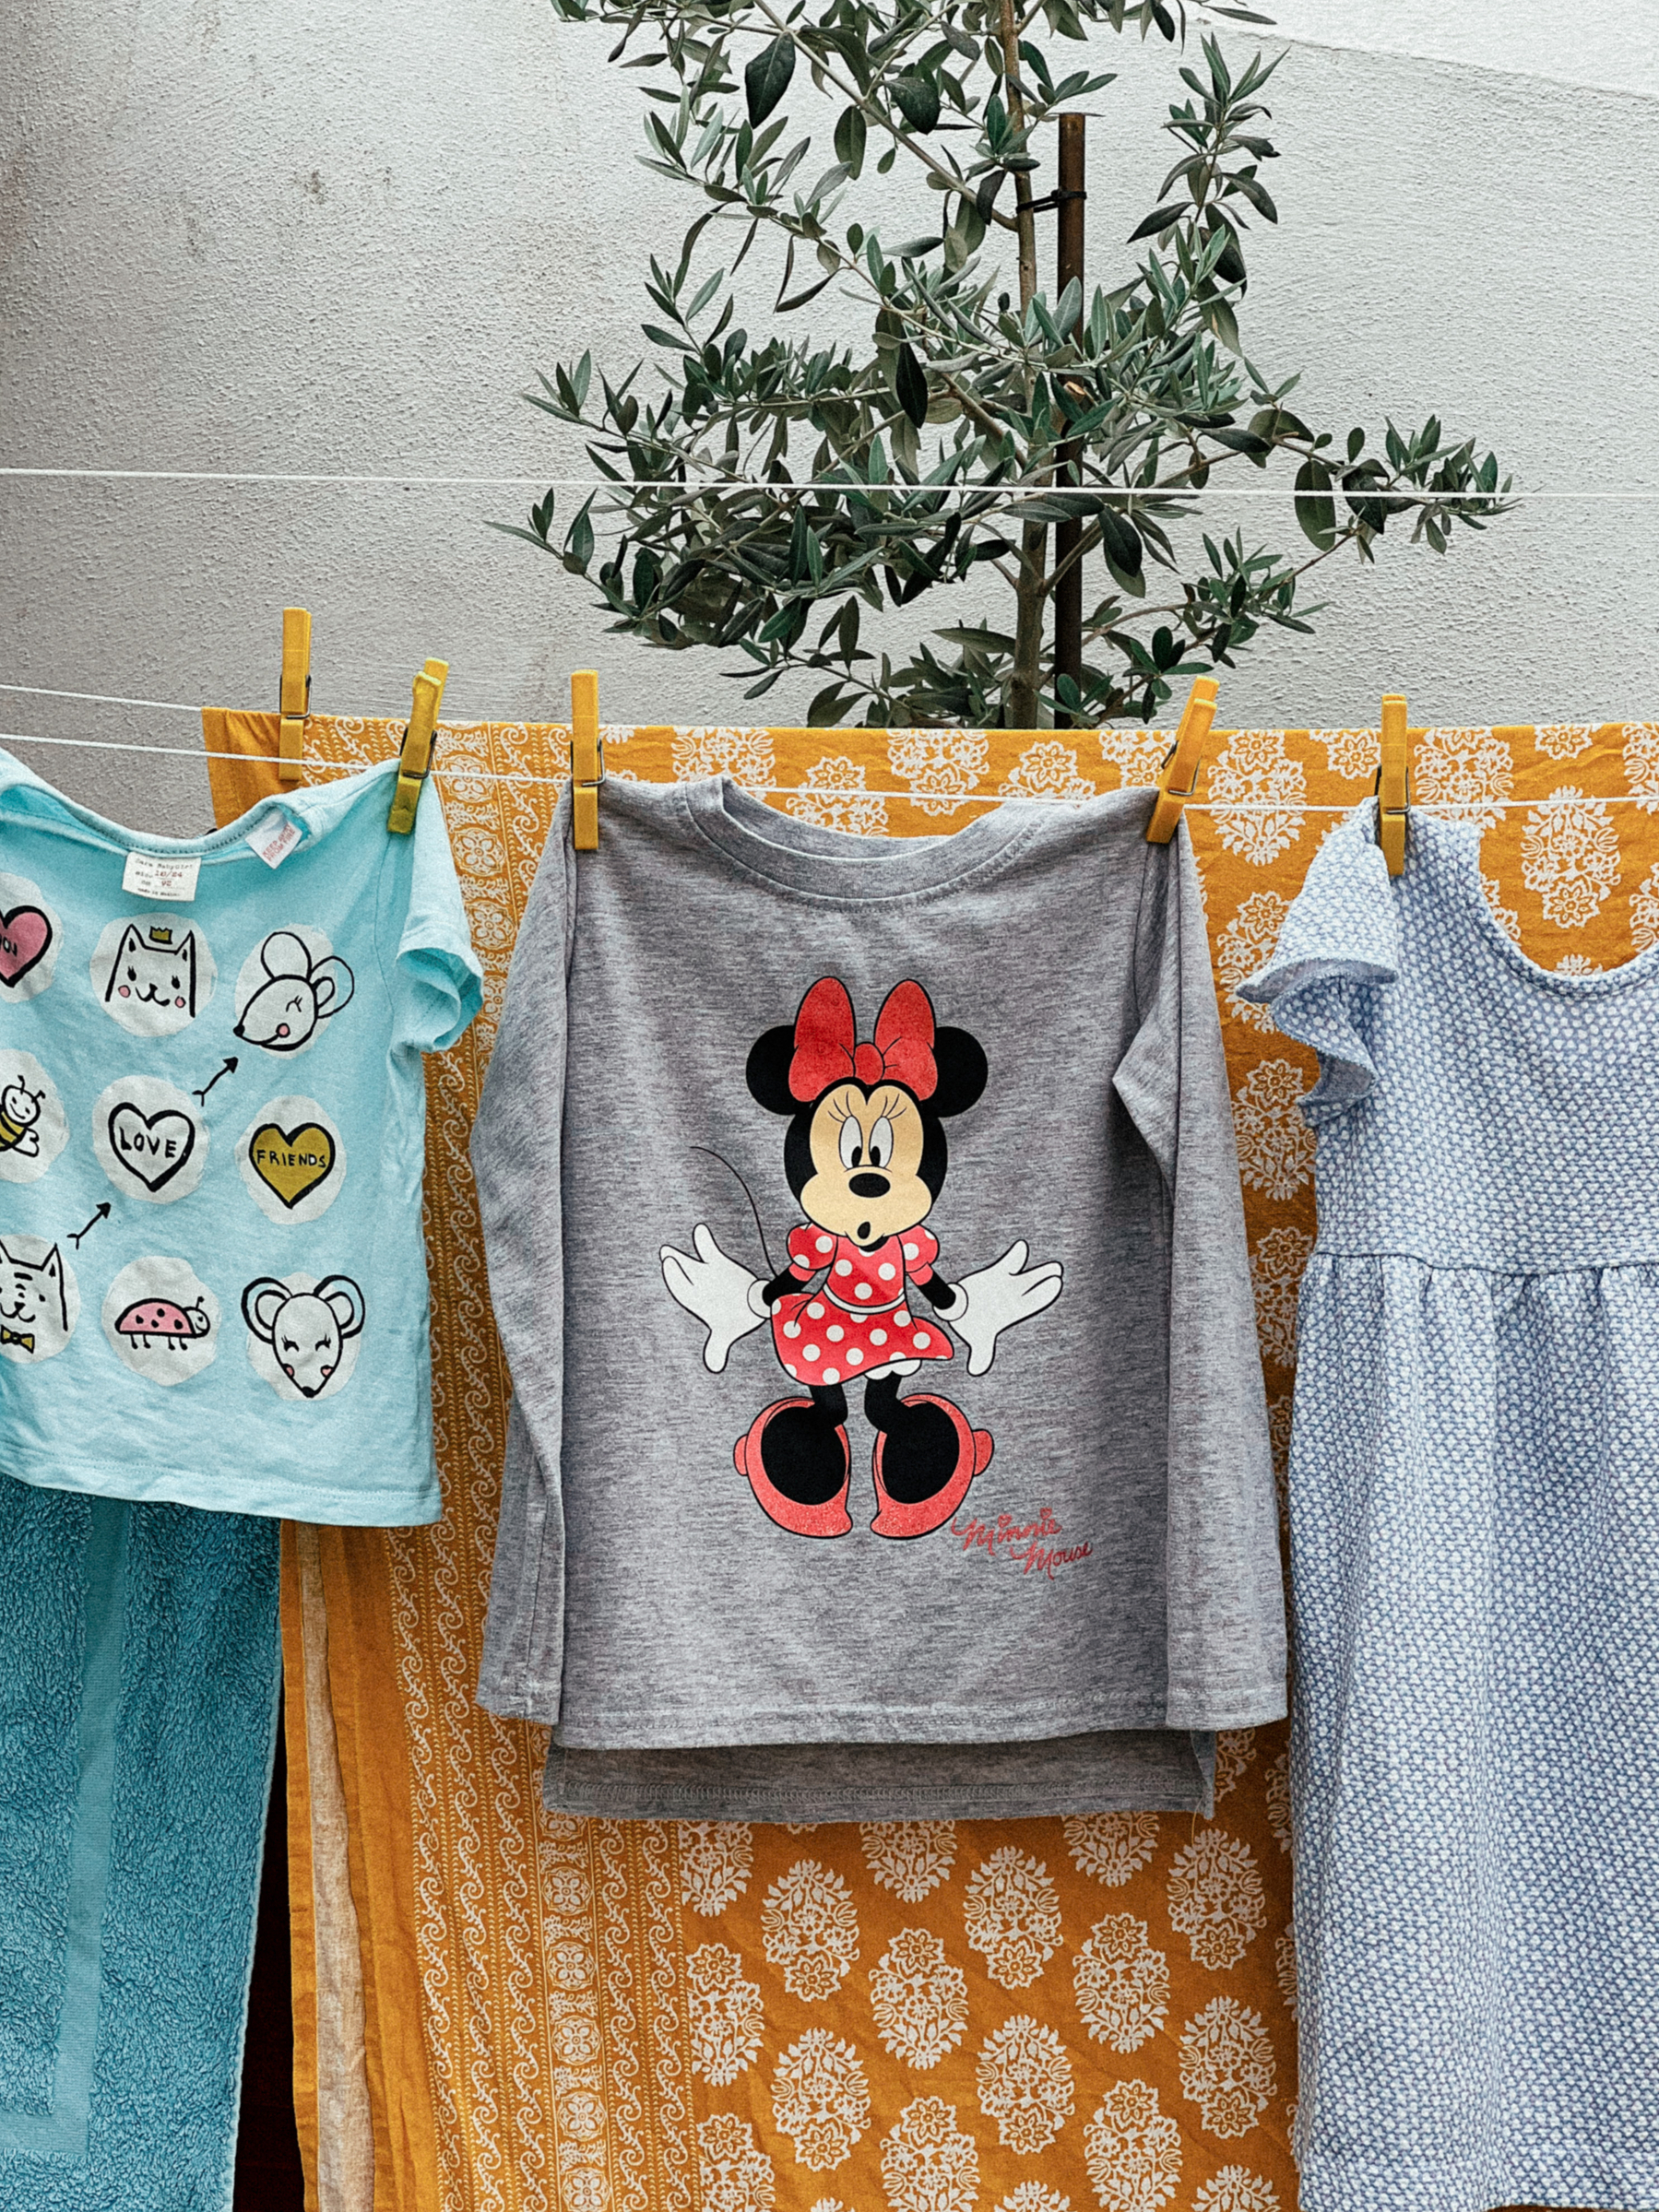 a shirt with Minnie Mouse hangs out to dry